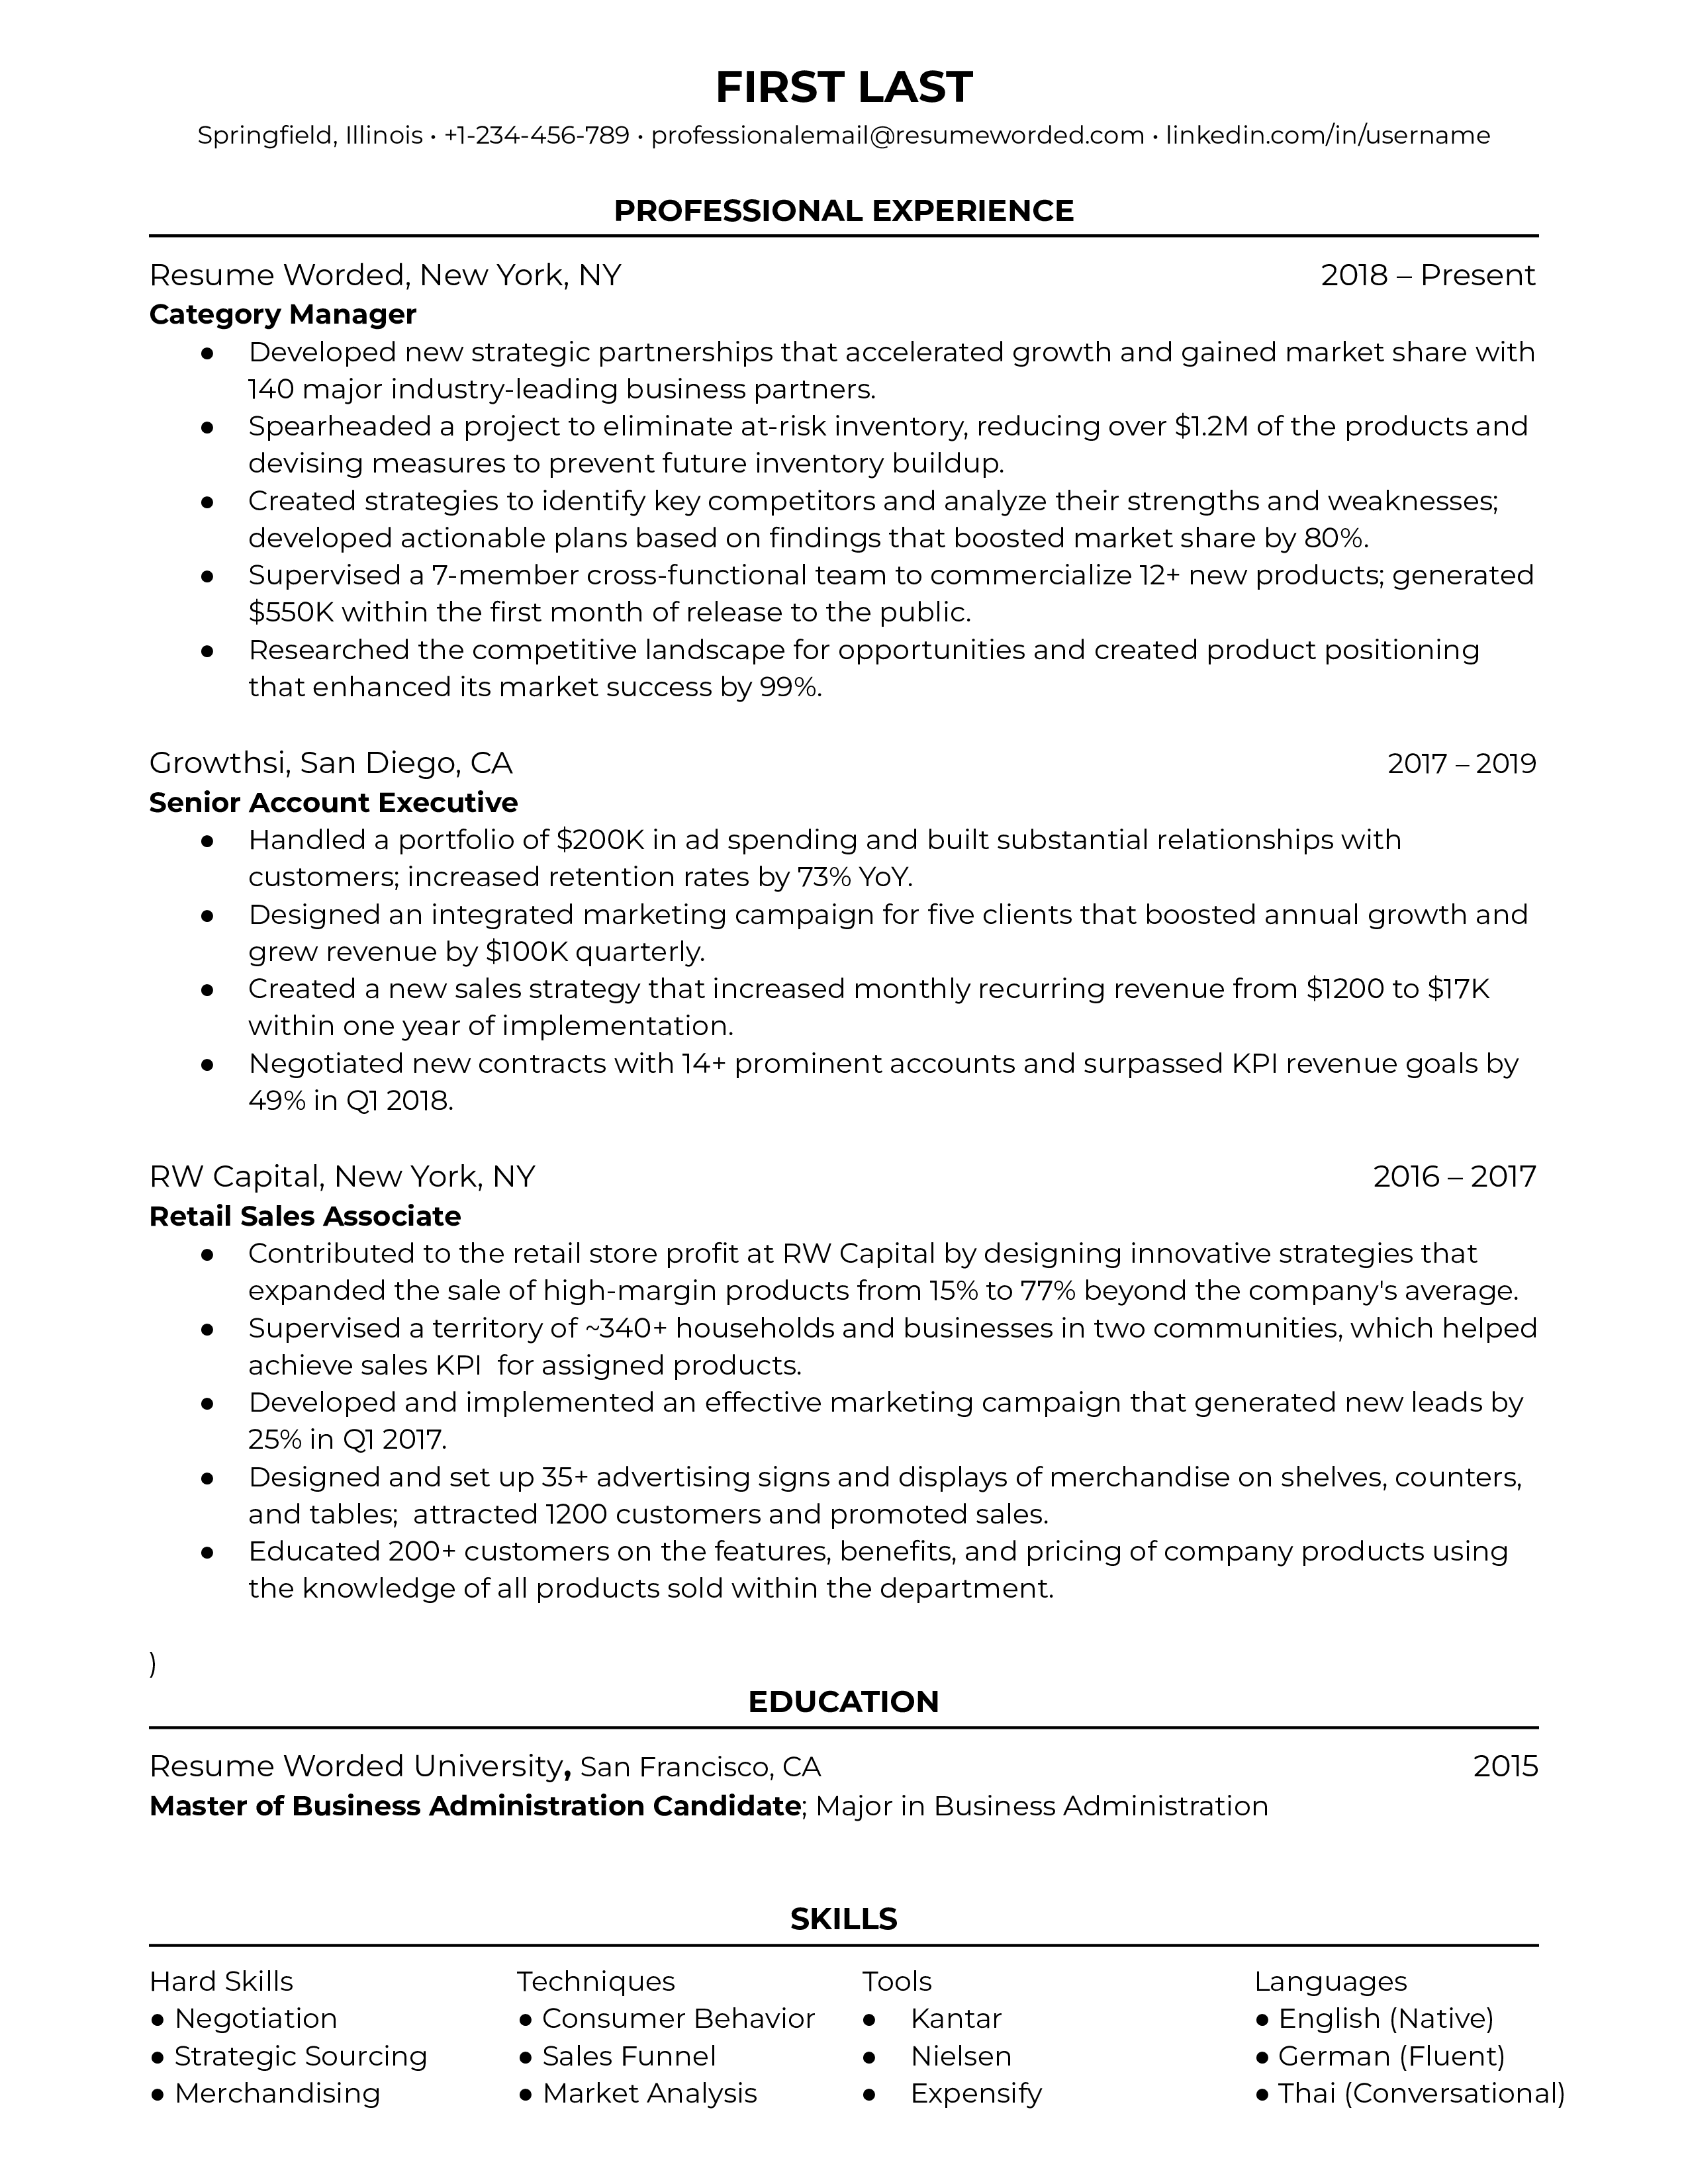 CV of a Category Manager showcasing skills in data analysis and e-commerce strategies.